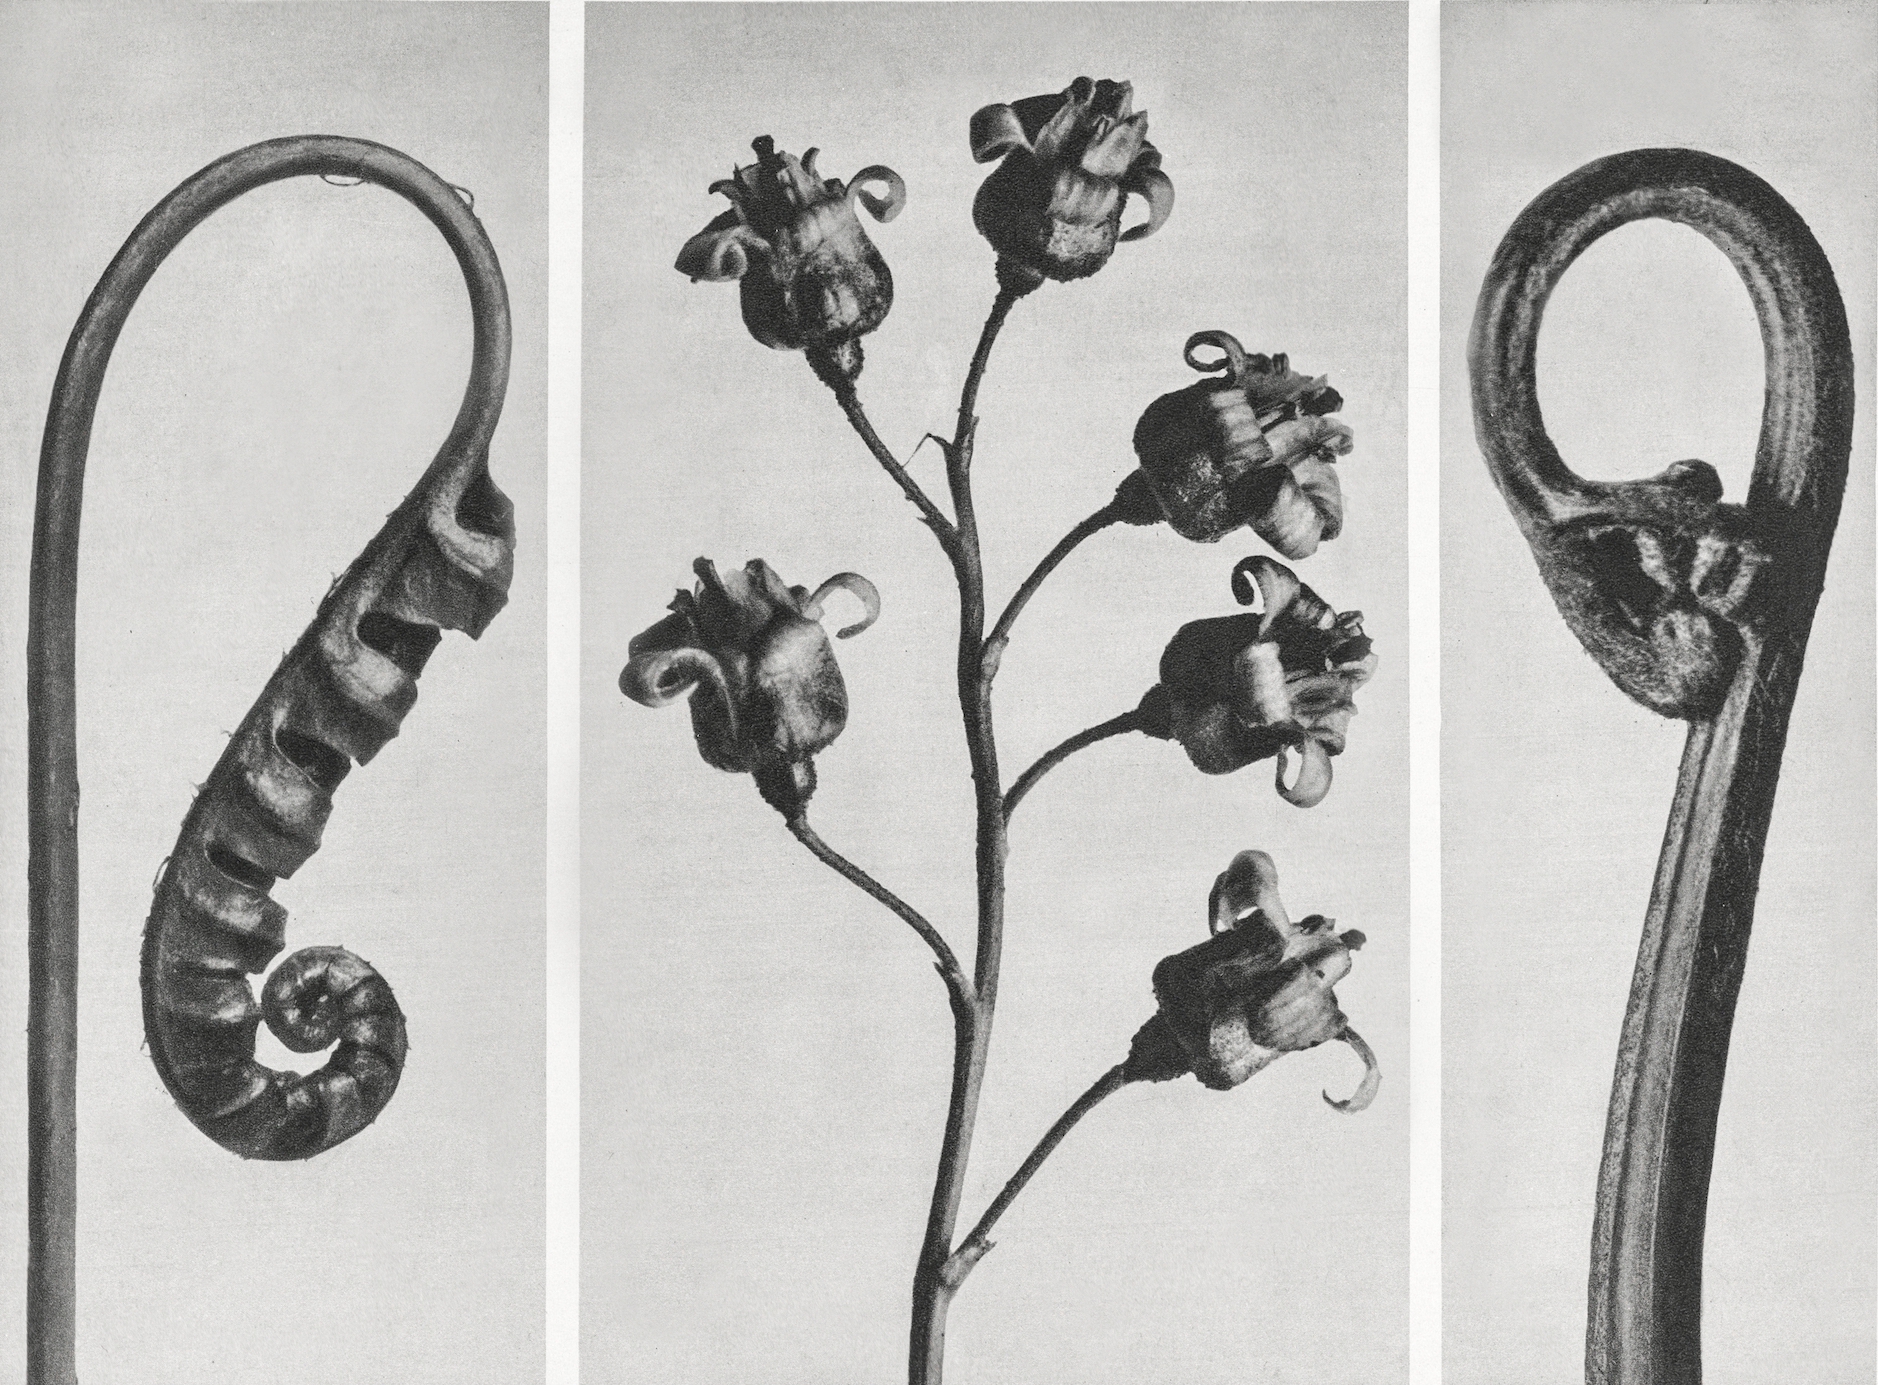 Polypodium Vulgare (Common Polypody or Adder's Fern) young frond enlarged 7 times from Urformen der Kunst (1928) by Karl Blossfeldt. Original from The Rijksmuseum. Digitally enhanced by rawpixel.